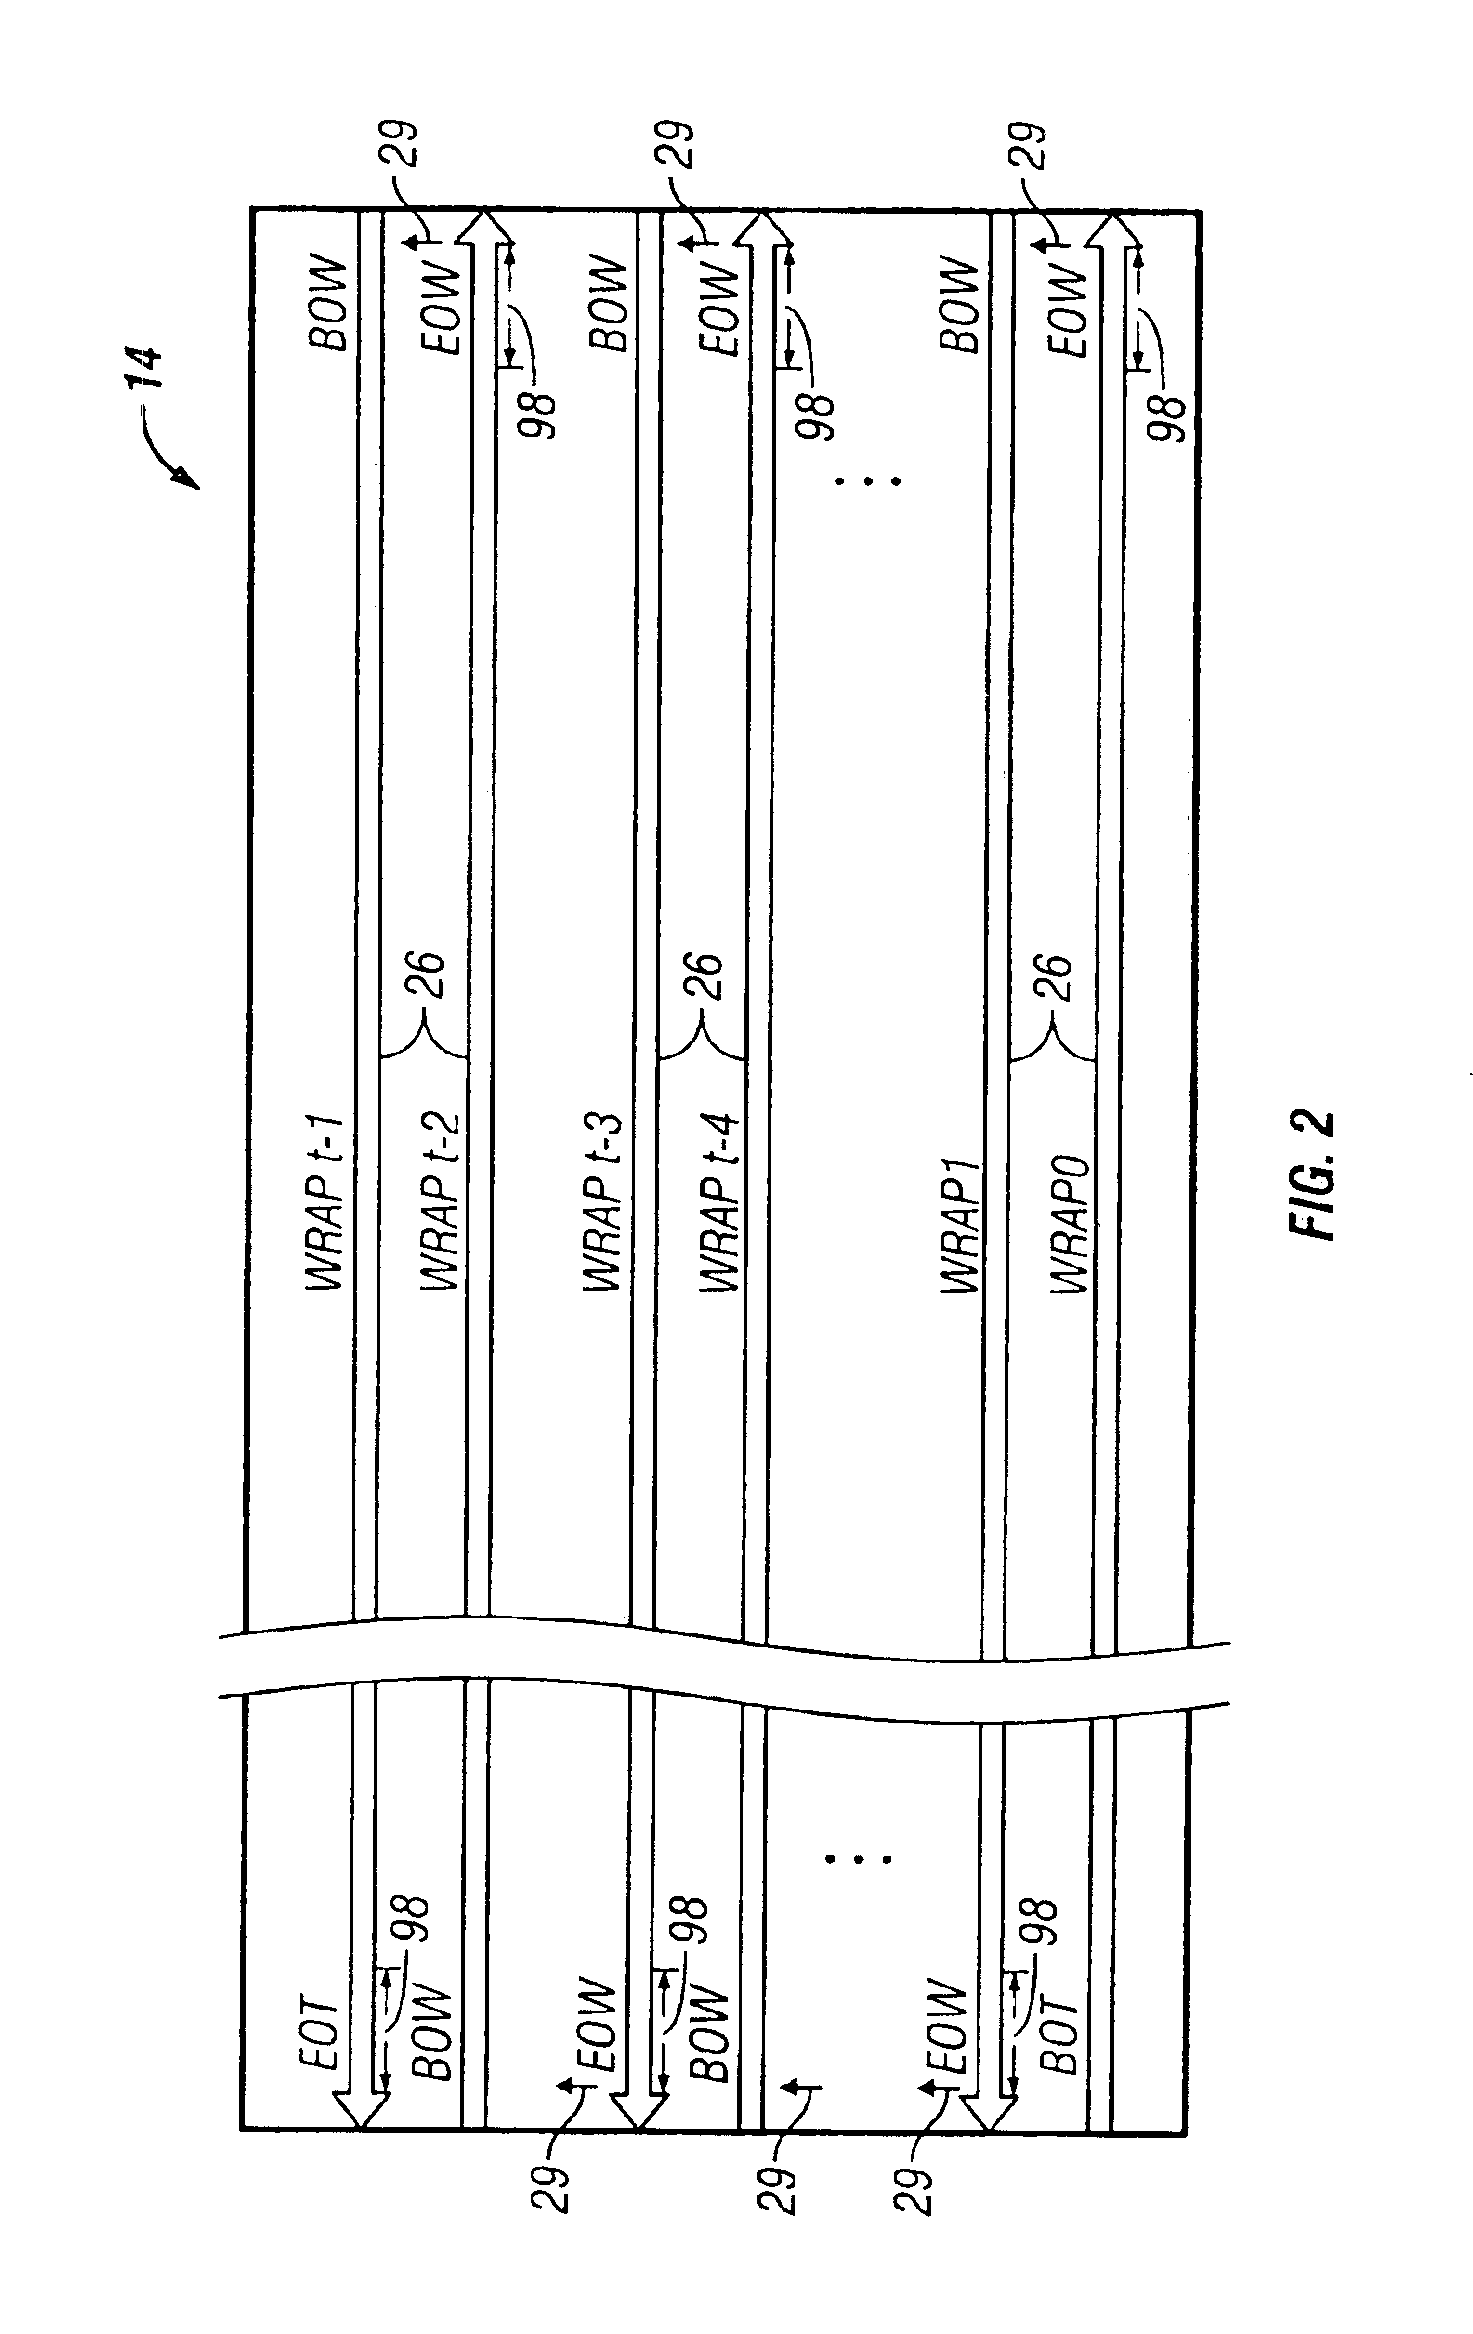 Forced backhitch for speed matching in a multi-speed tape drive